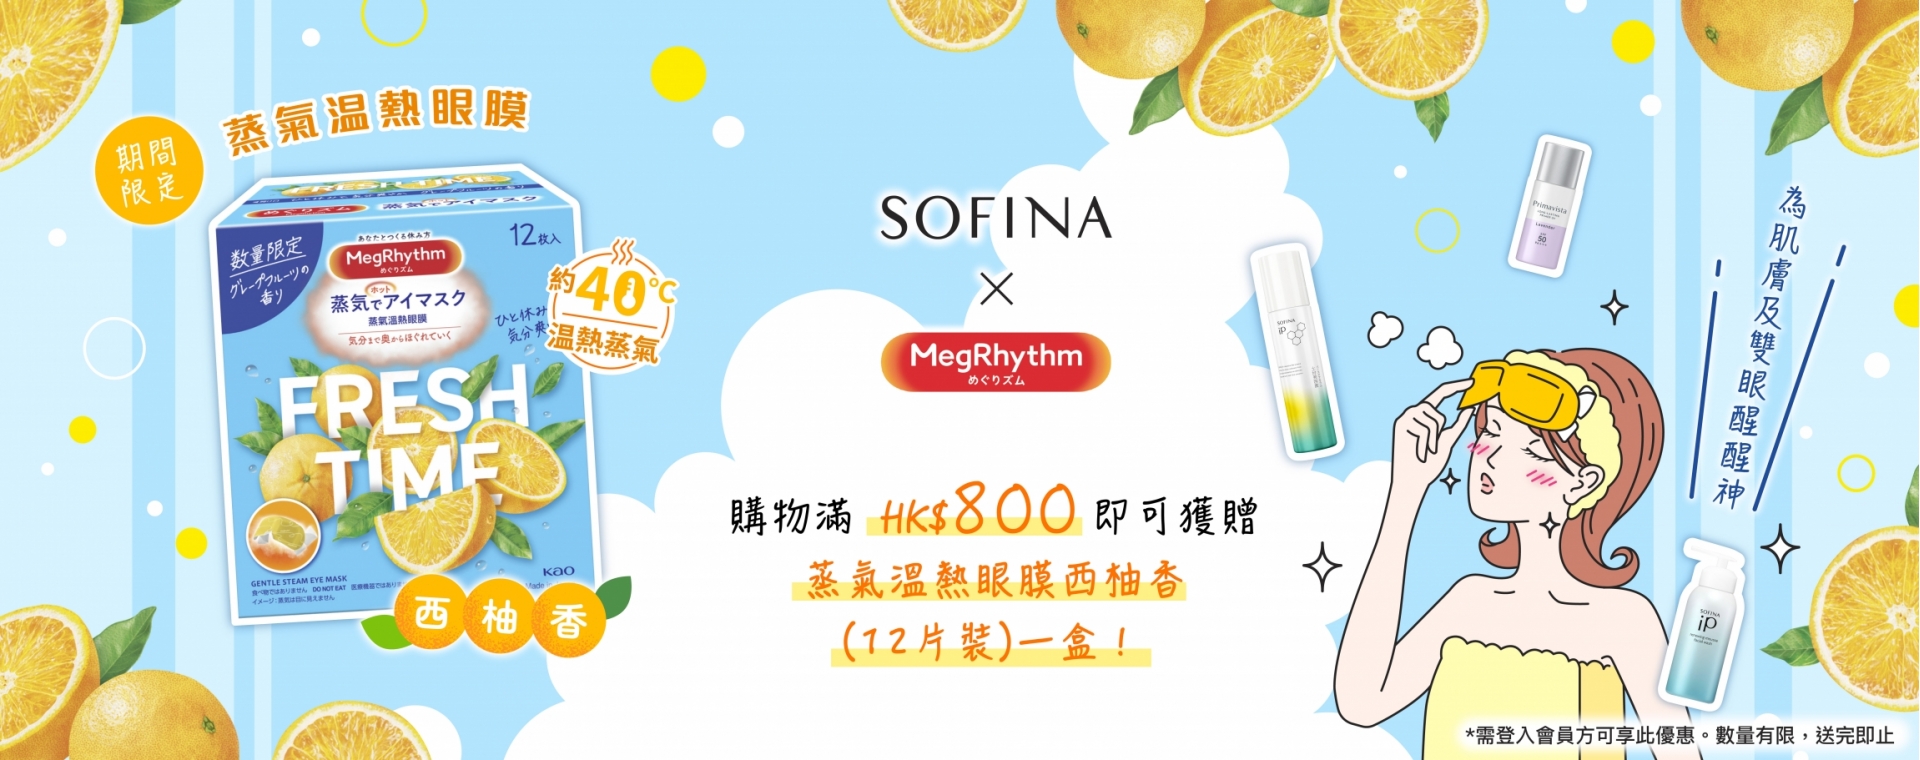 Sofina24_023_eShop_Promotion_Online_Banner_May_aw06_1920x760_8